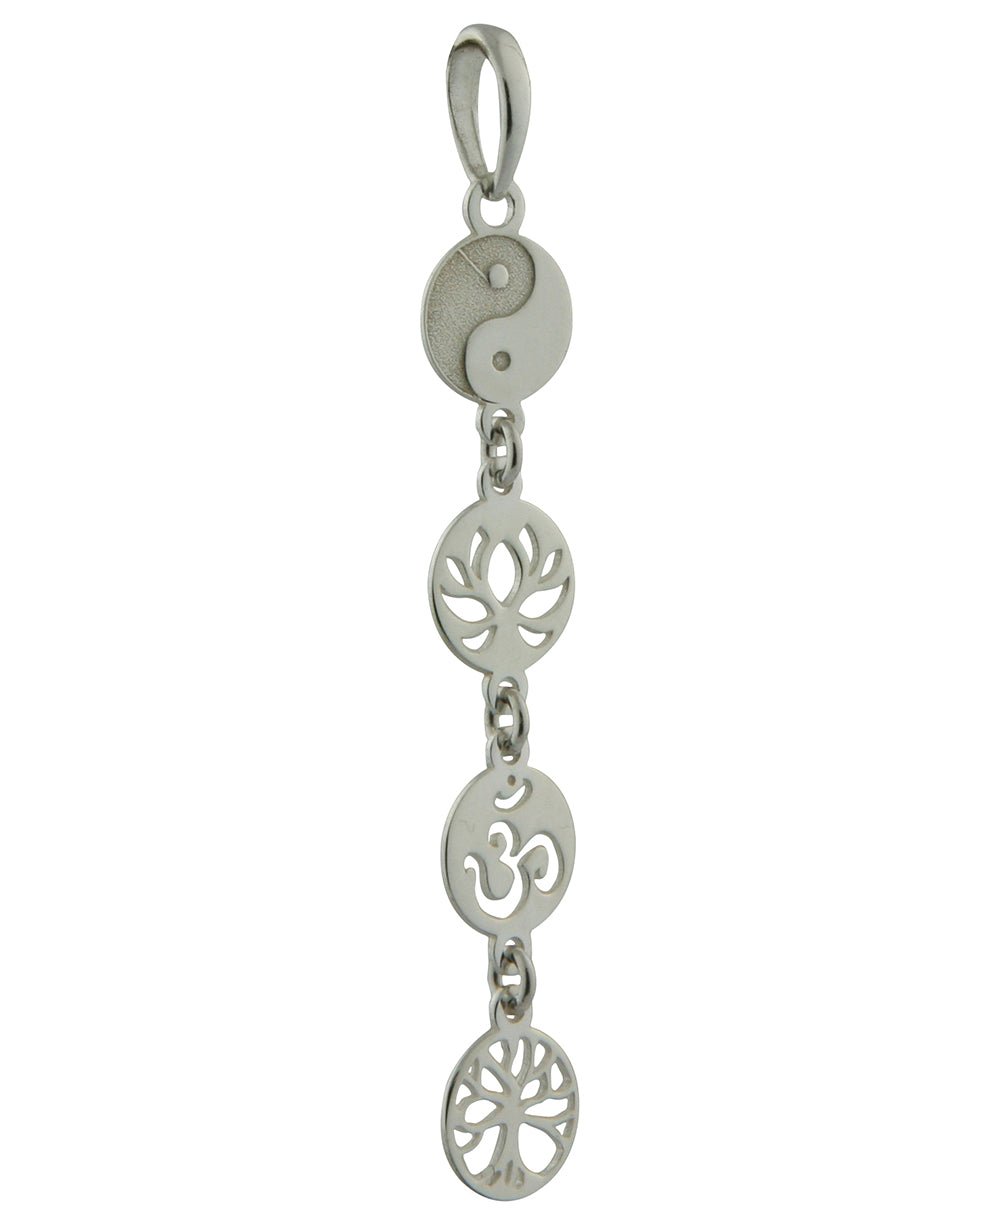 Dainty Sterling Silver Link Pendant with Meaningful Symbols - Charms & Pendants